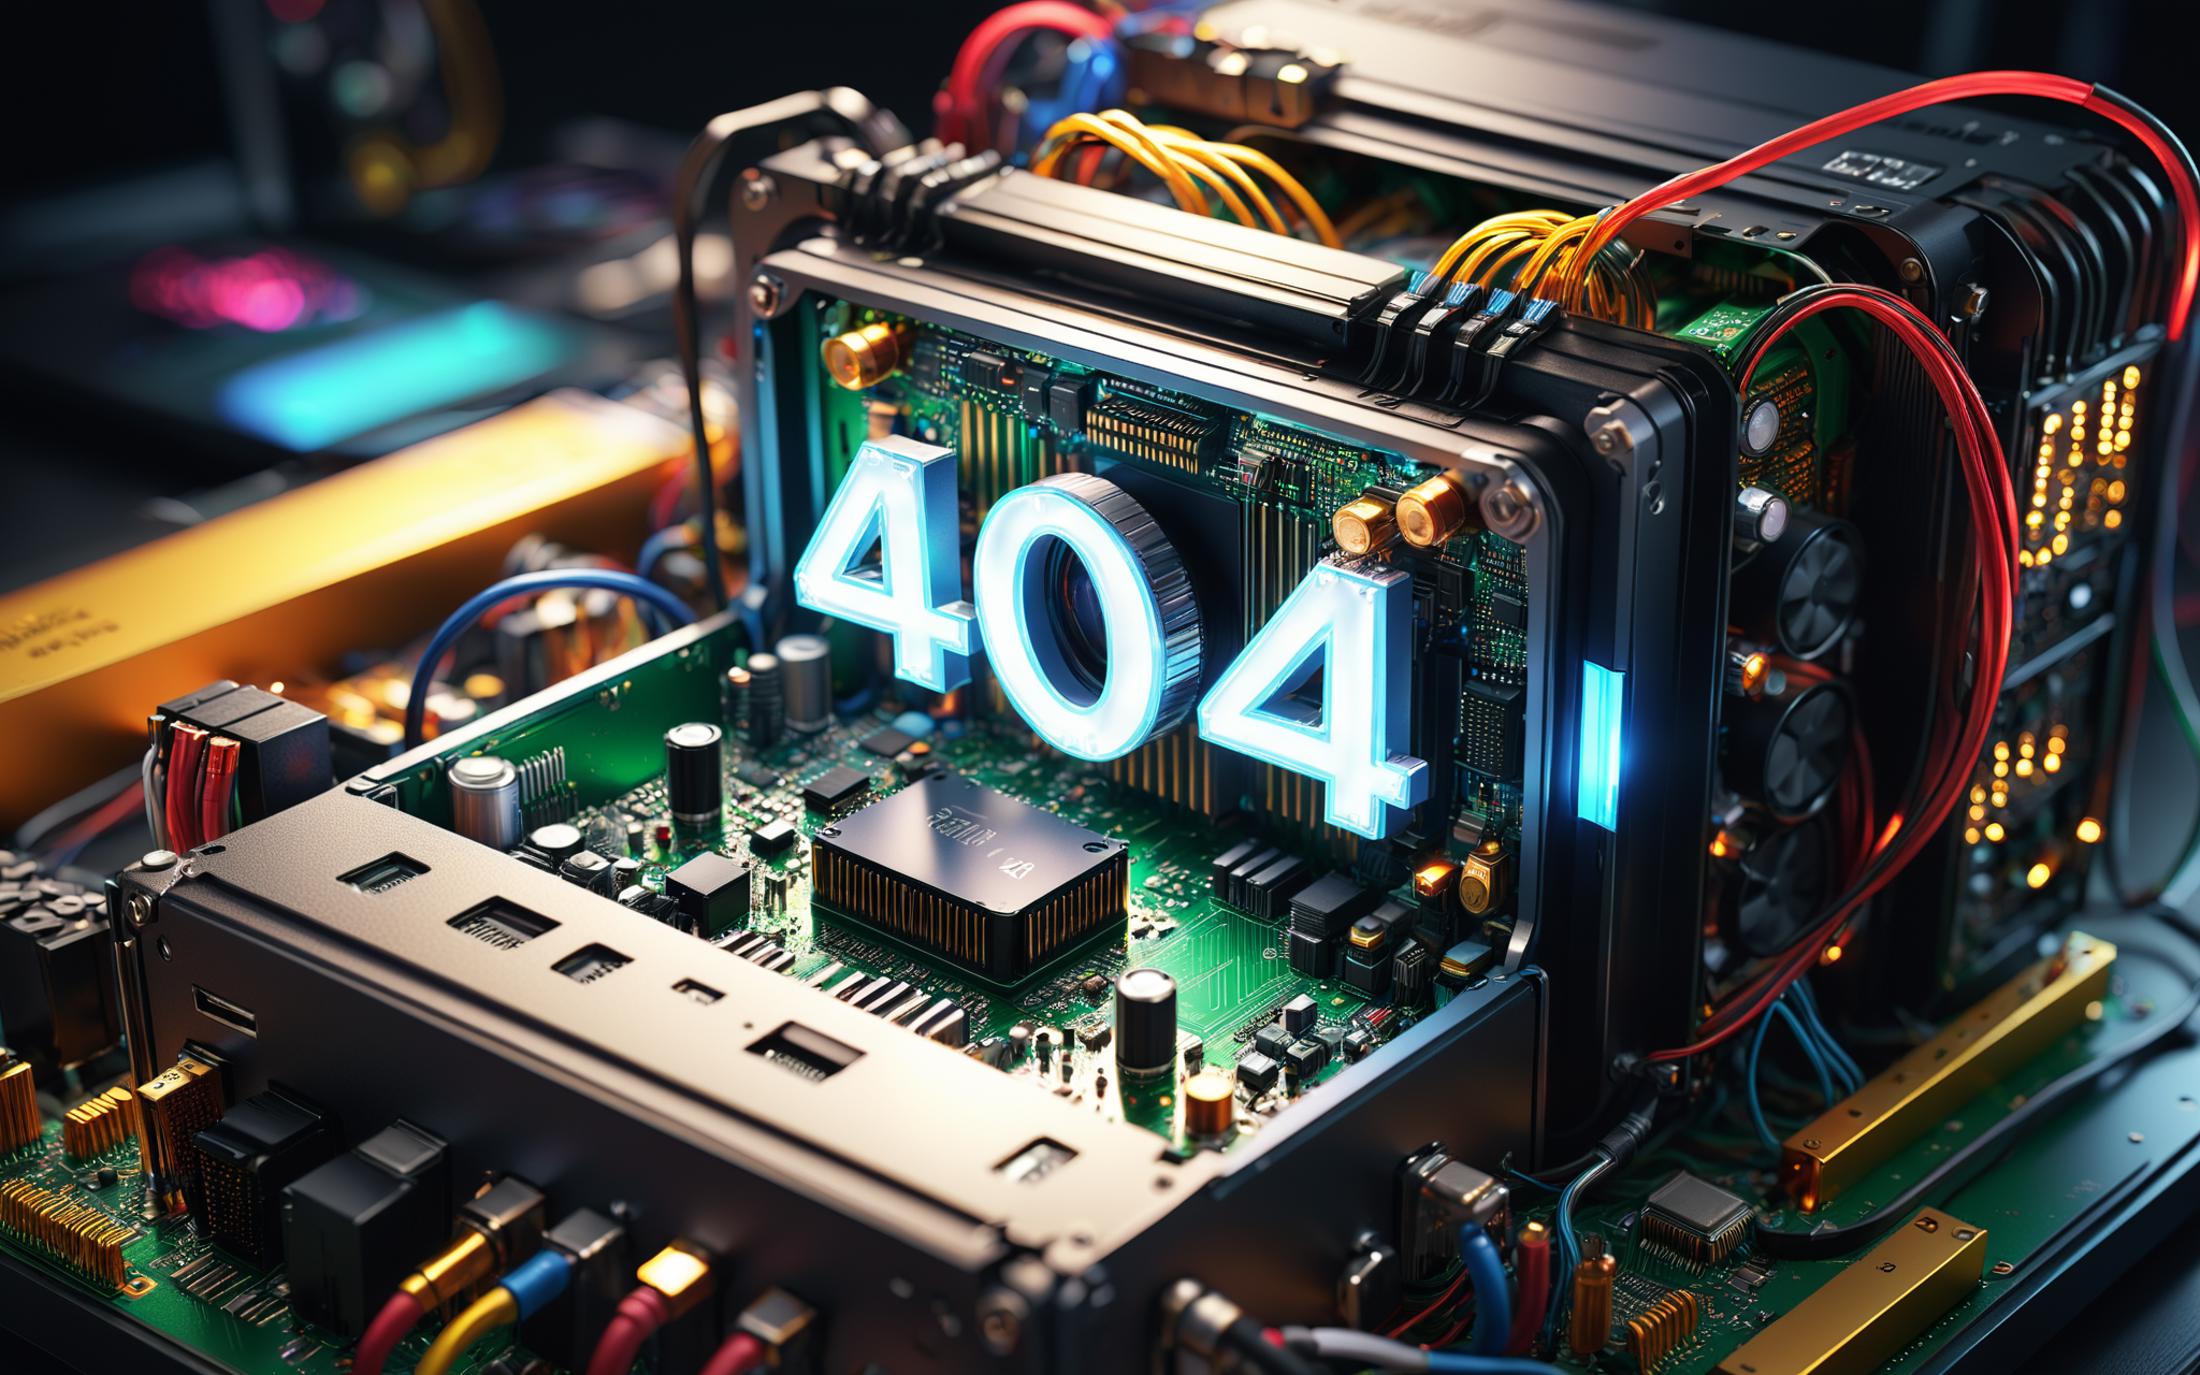 A 3D image of a computer circuit board with the numbers 404 on it, surrounded by wires.